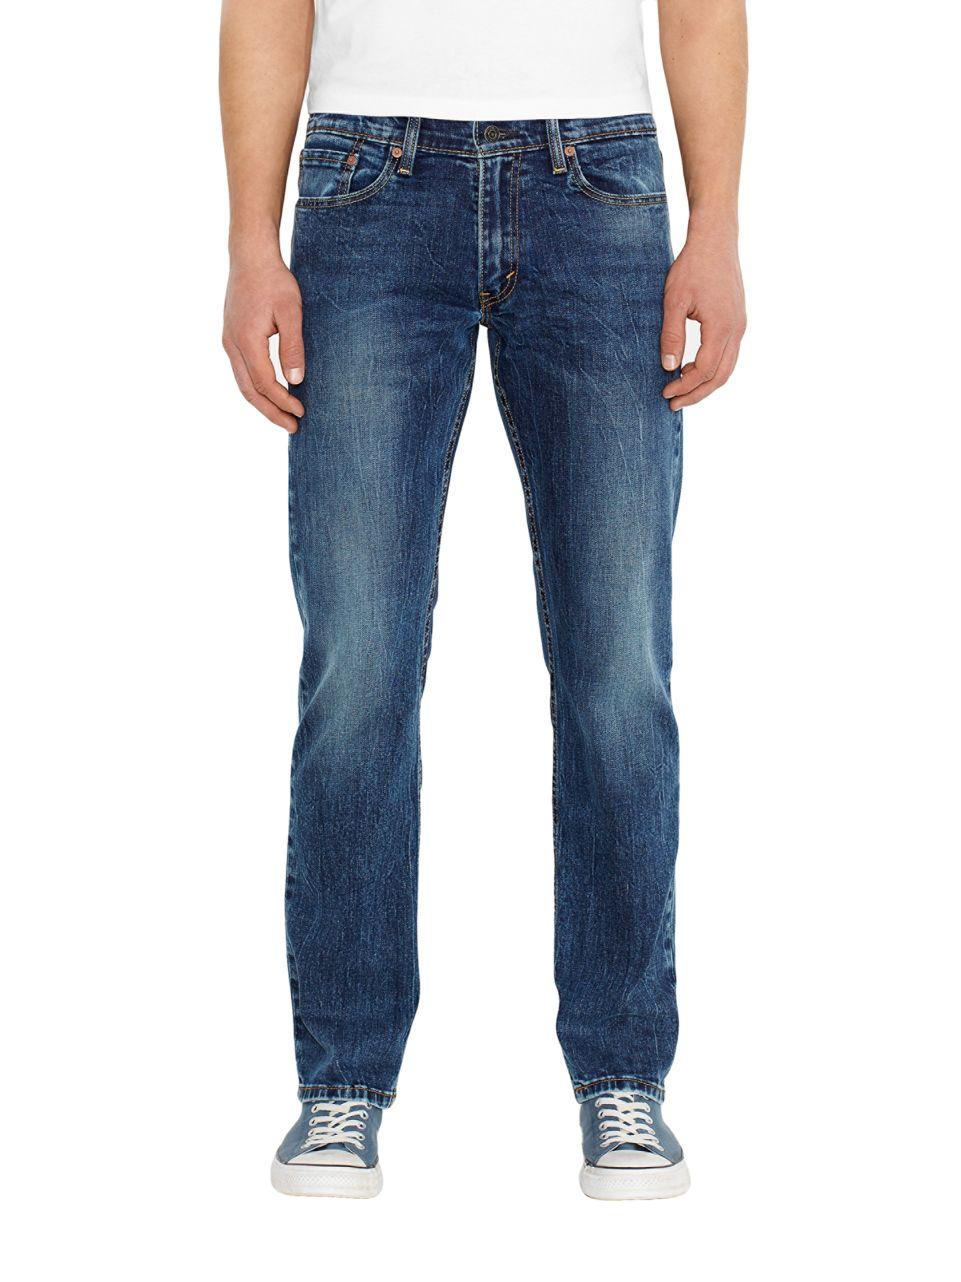 Lyst - Levi'S 514 Straight Fit Black Stone Jeans in Blue for Men